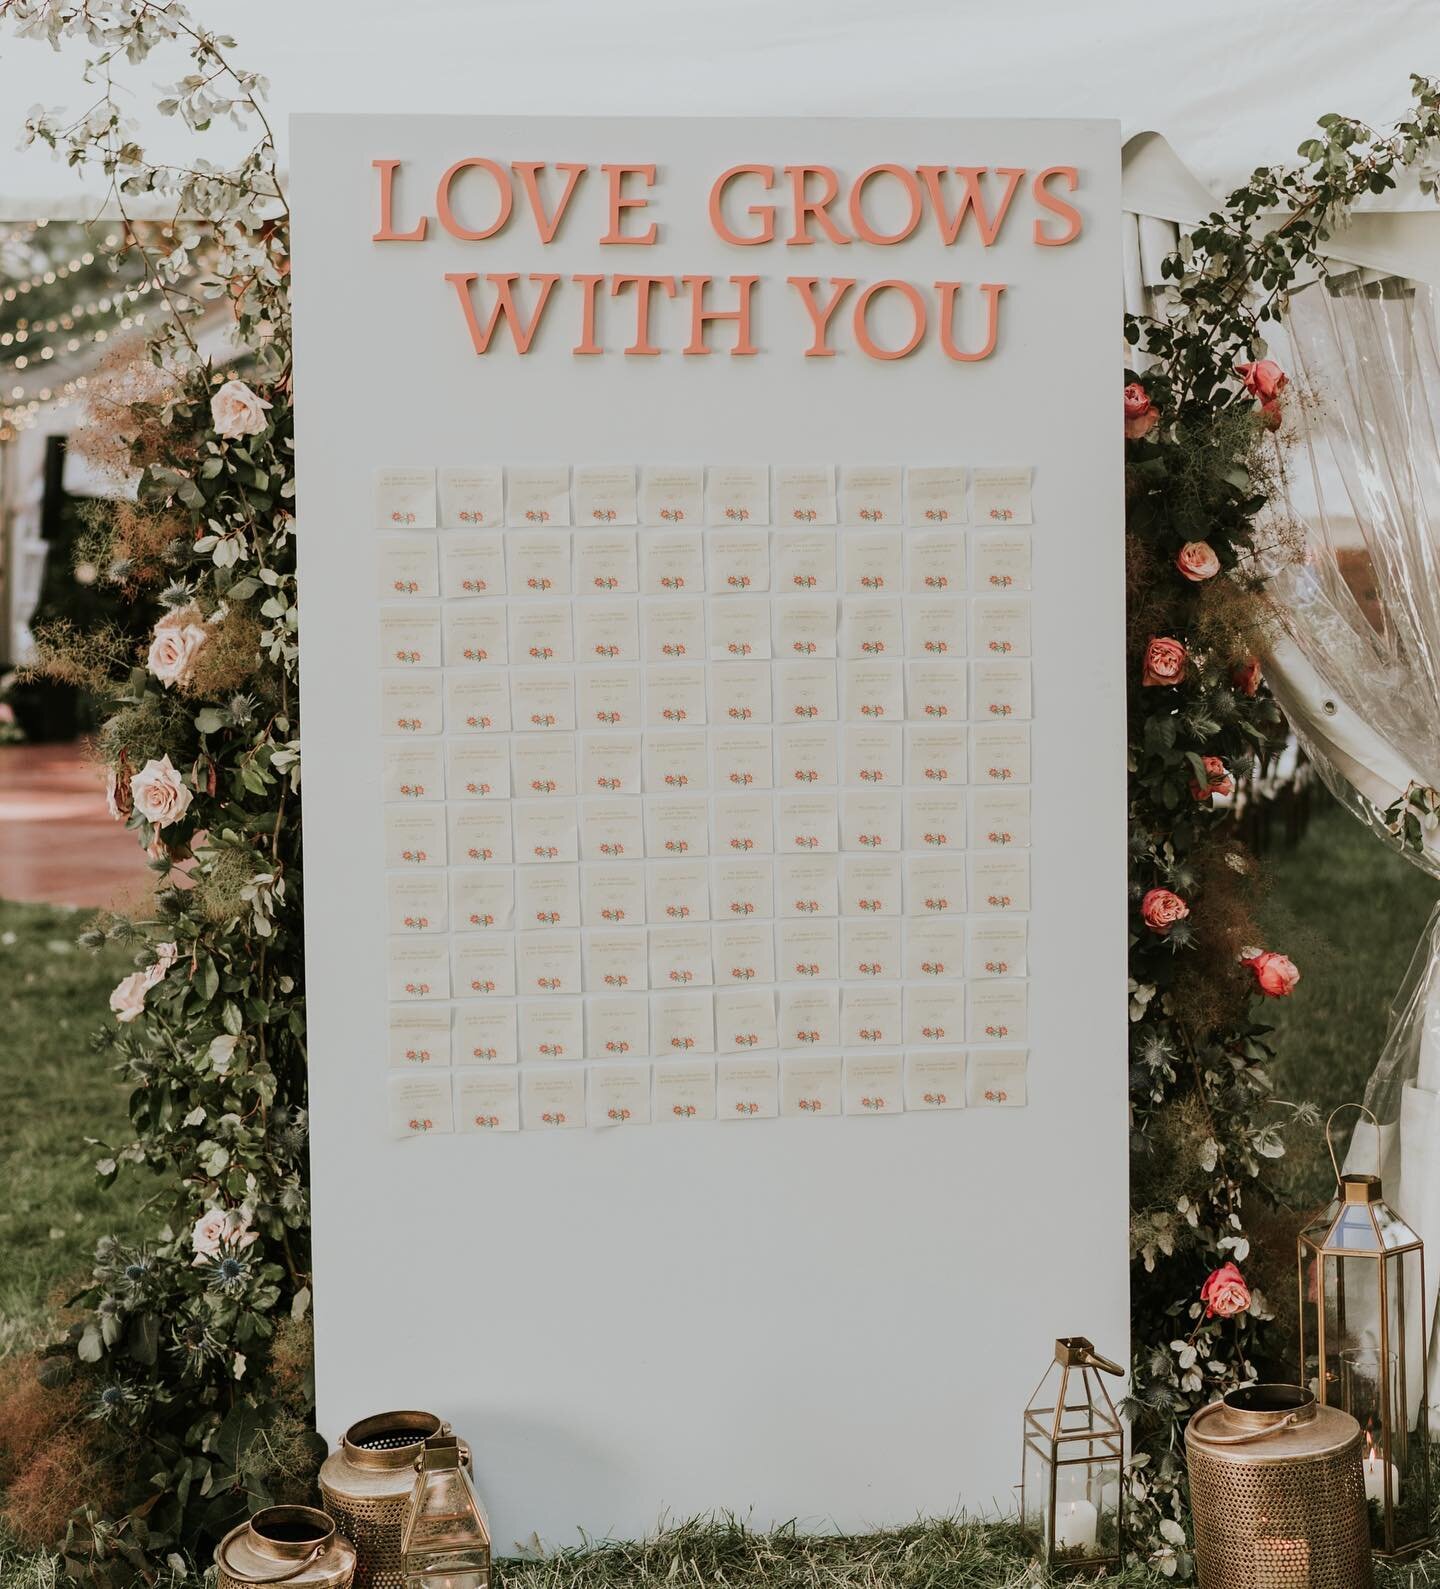 Escort display with seed paper escort cards. Guests were able to plant their escort cards and grow wildflowers. Perfect for this garden wedding!

And guess what was on the other side of this wall?! The headphones for the silent disco after party!

Ph